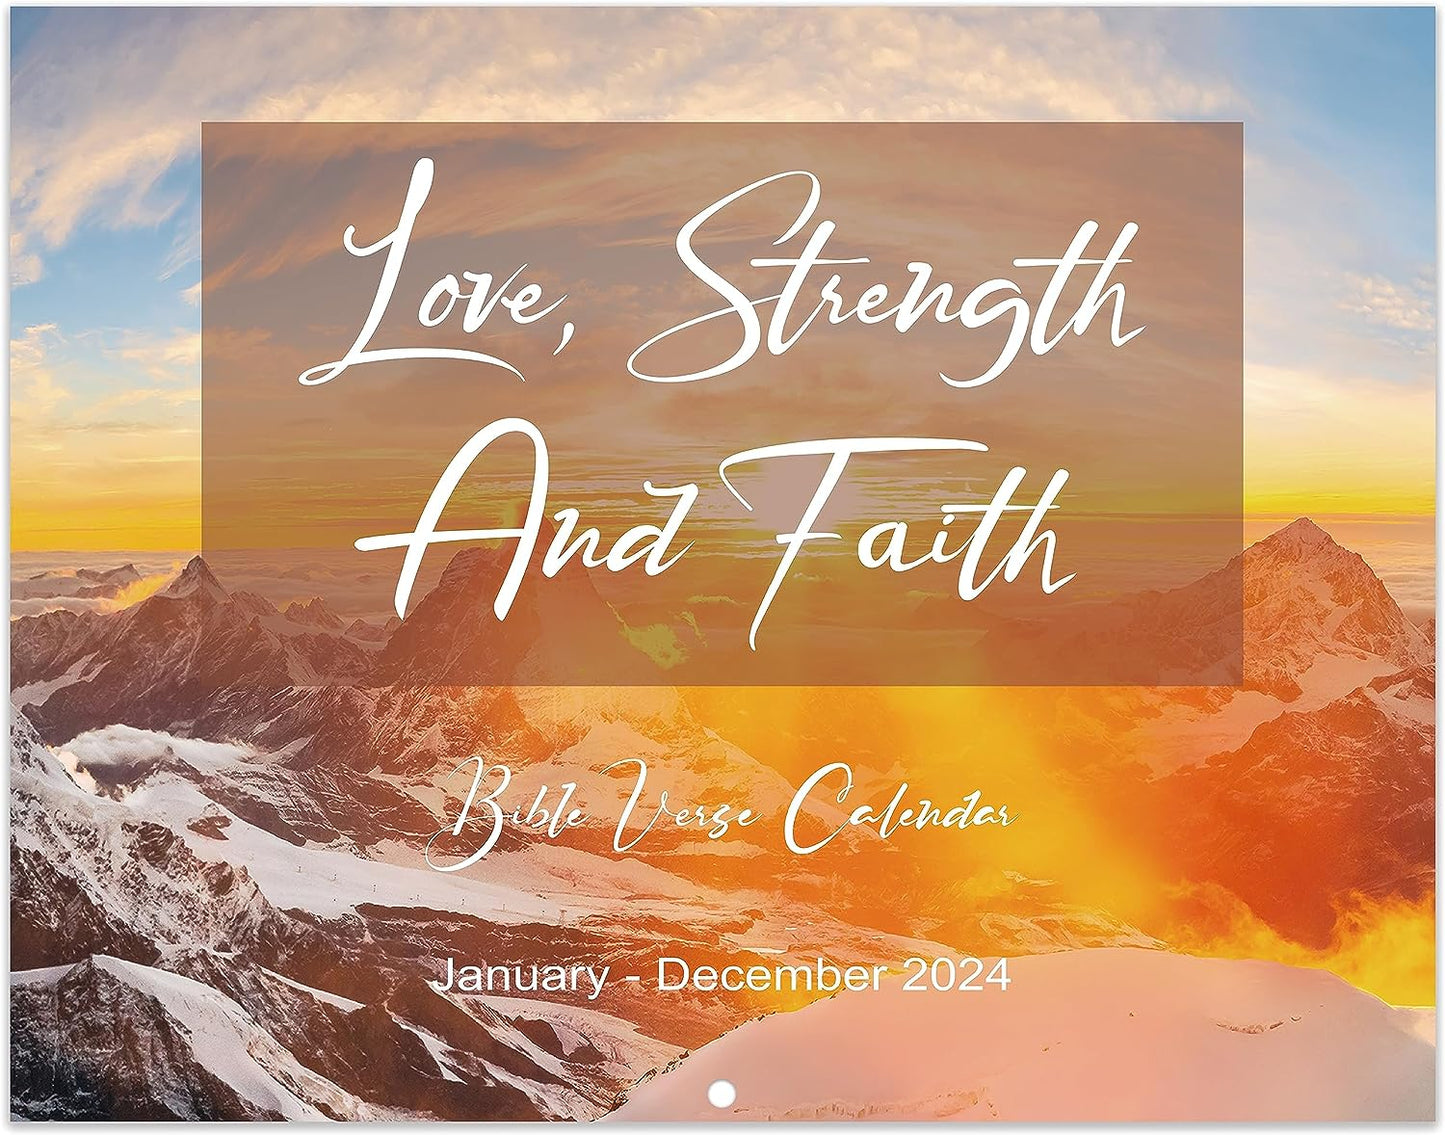 Love Strength And Faith Bible Verse 2024 Christian Wall Calendar , 17 x 11 (Open) with Hanging Hook, Blocks and Holidays claimedbygoddesigns